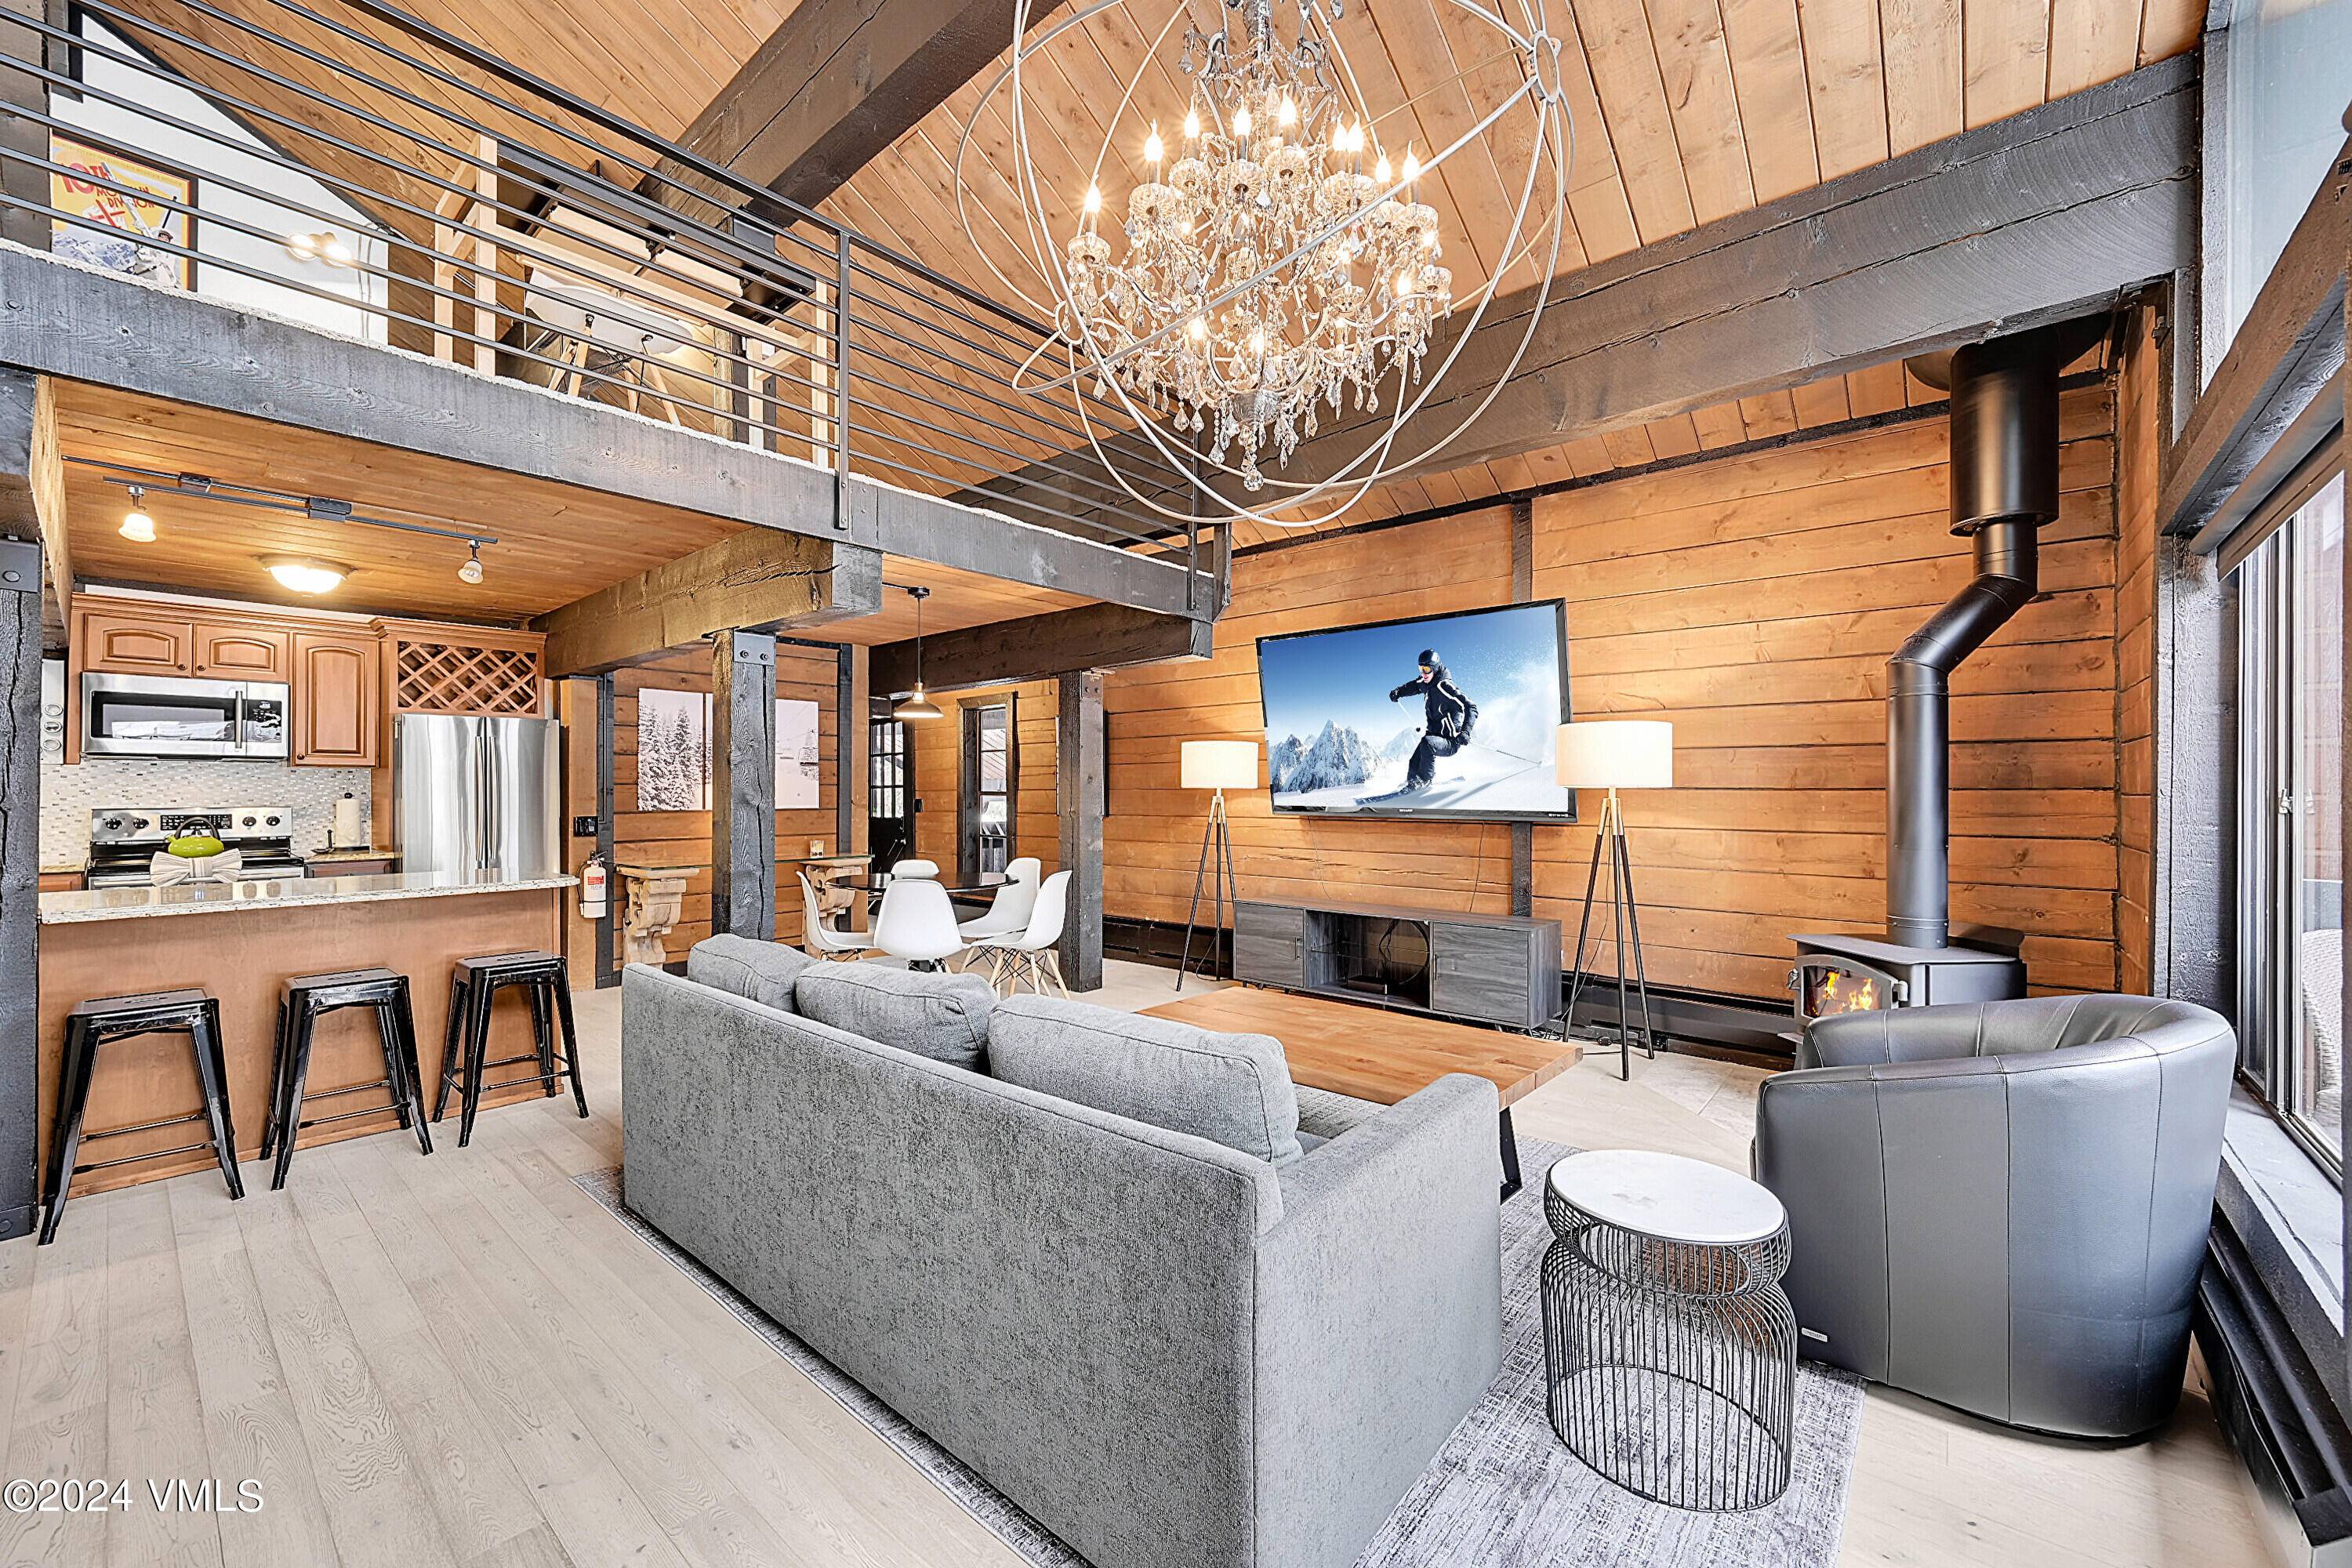 Bright penthouse on Gore Creek with vaulted ceilings, skylights, fun sized kitchen, bar top, dining area, loft office sleeping area, wood stove, huge TV and a massive wall of glass ...